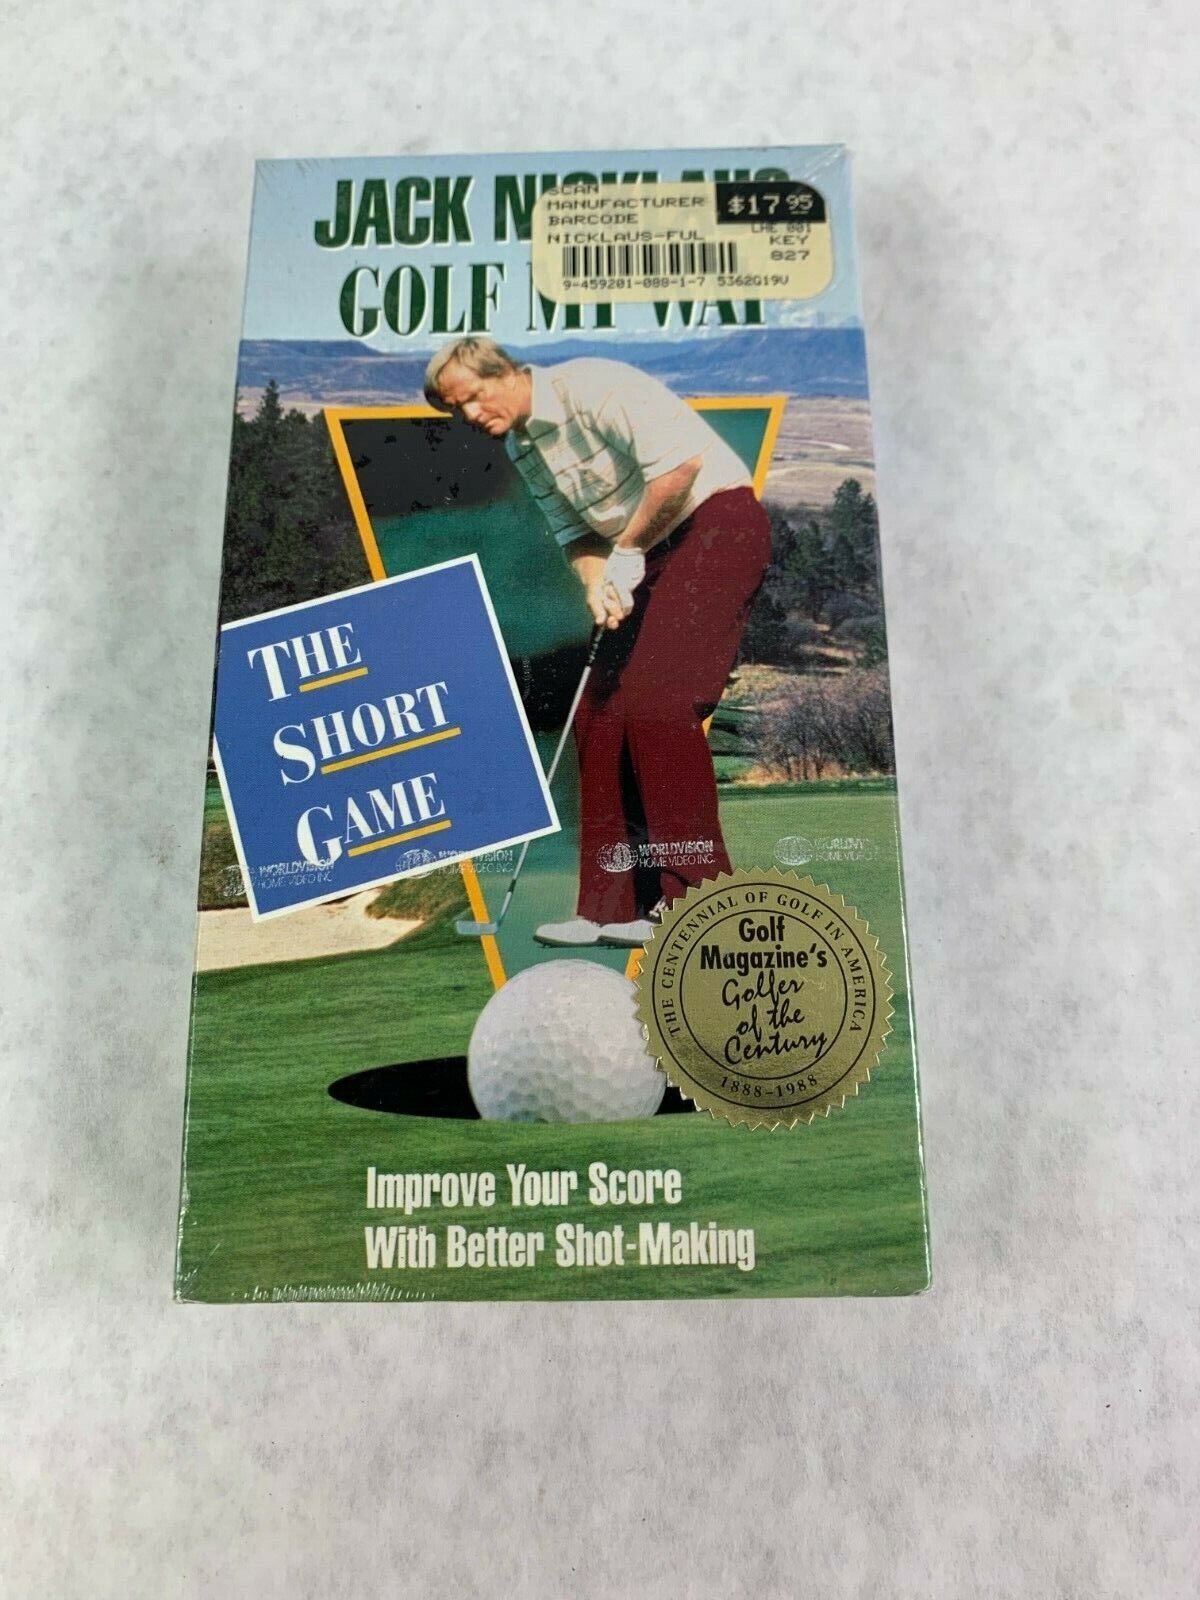 Vintage Classic Jack Nicklaus Golf My Way The Full Swing VHS Video Tape Movie